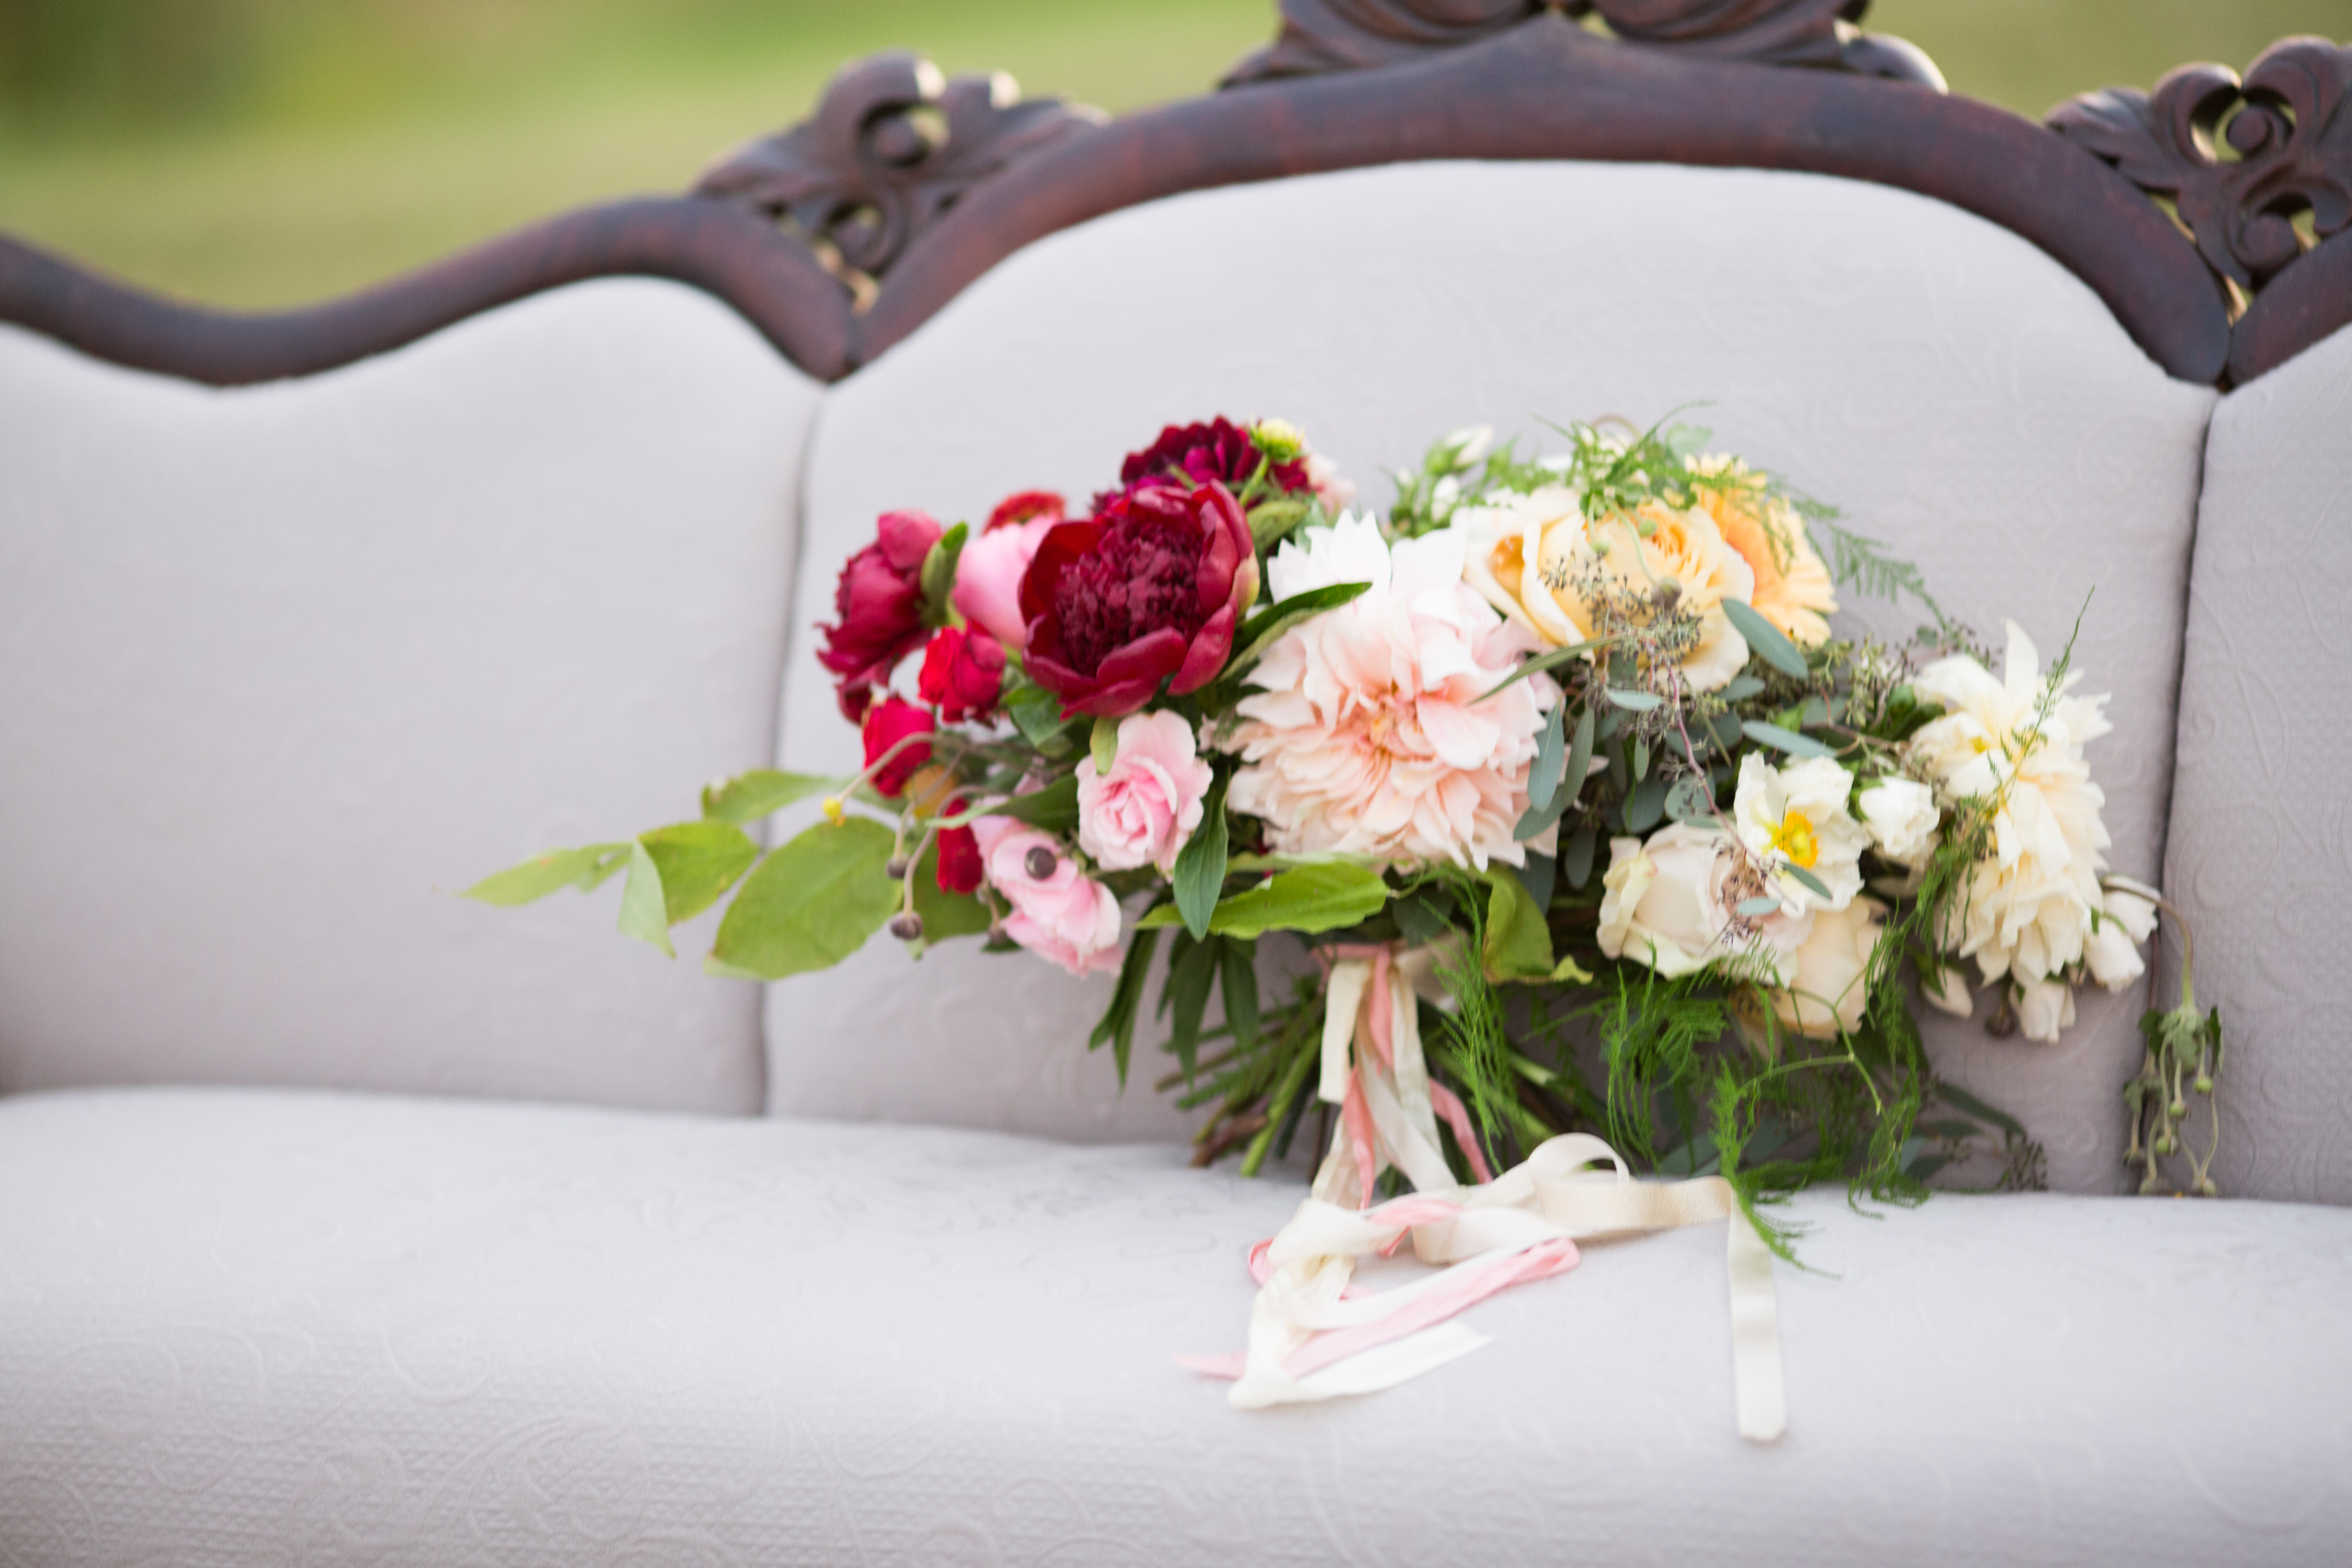 Burgundy and Blush Bouquet | The Day's Design | Hetler Photography